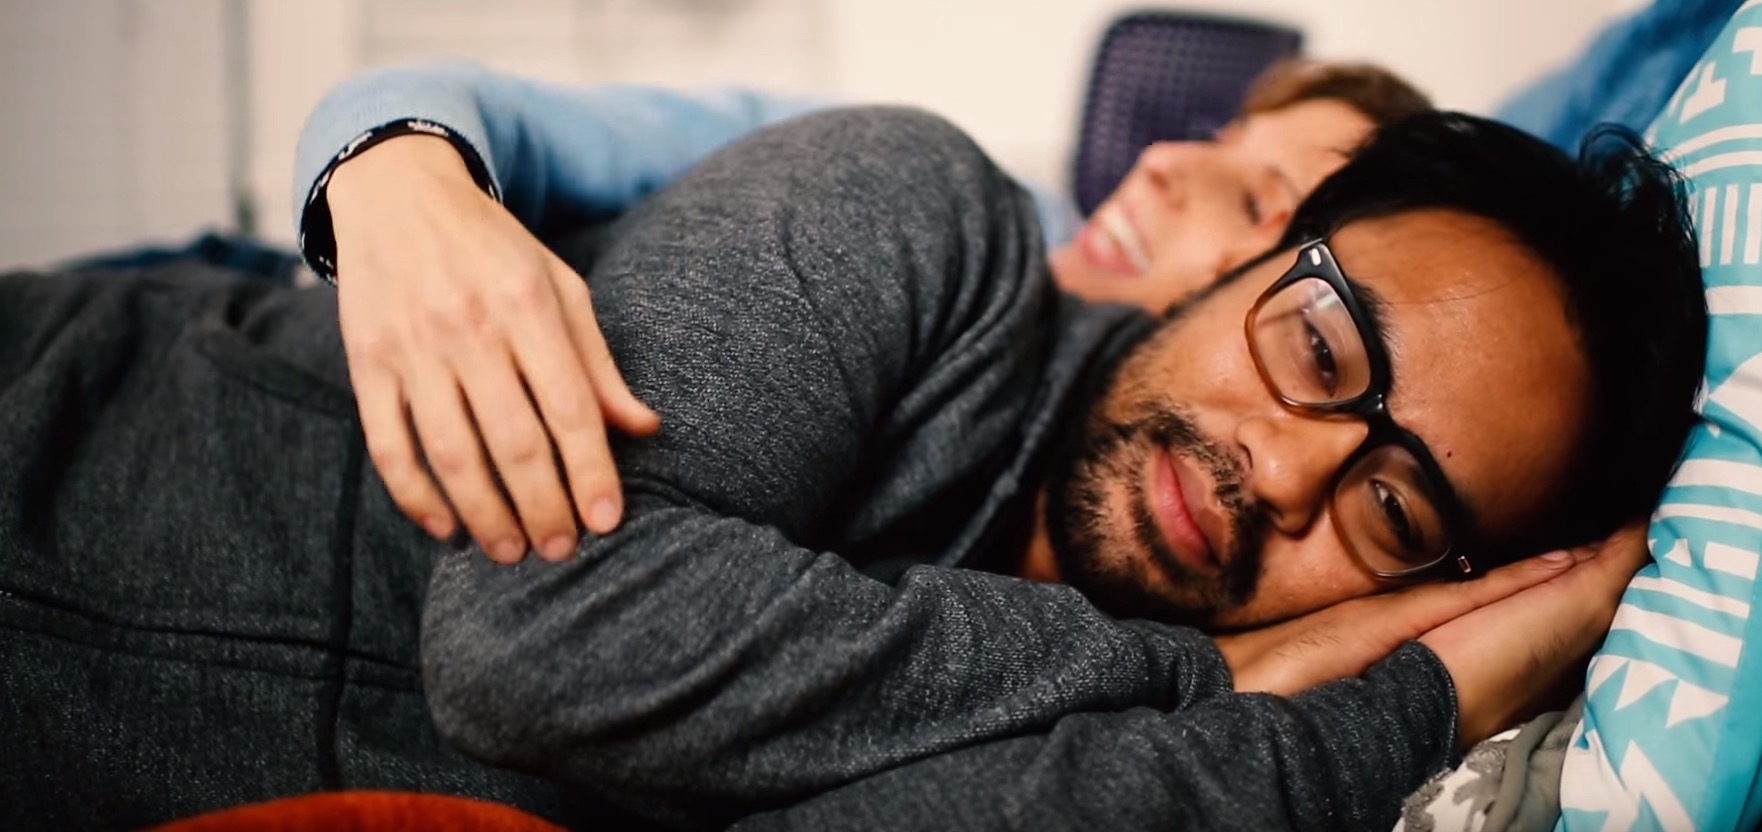 The Pros of Professional Cuddling and How to Get Involved